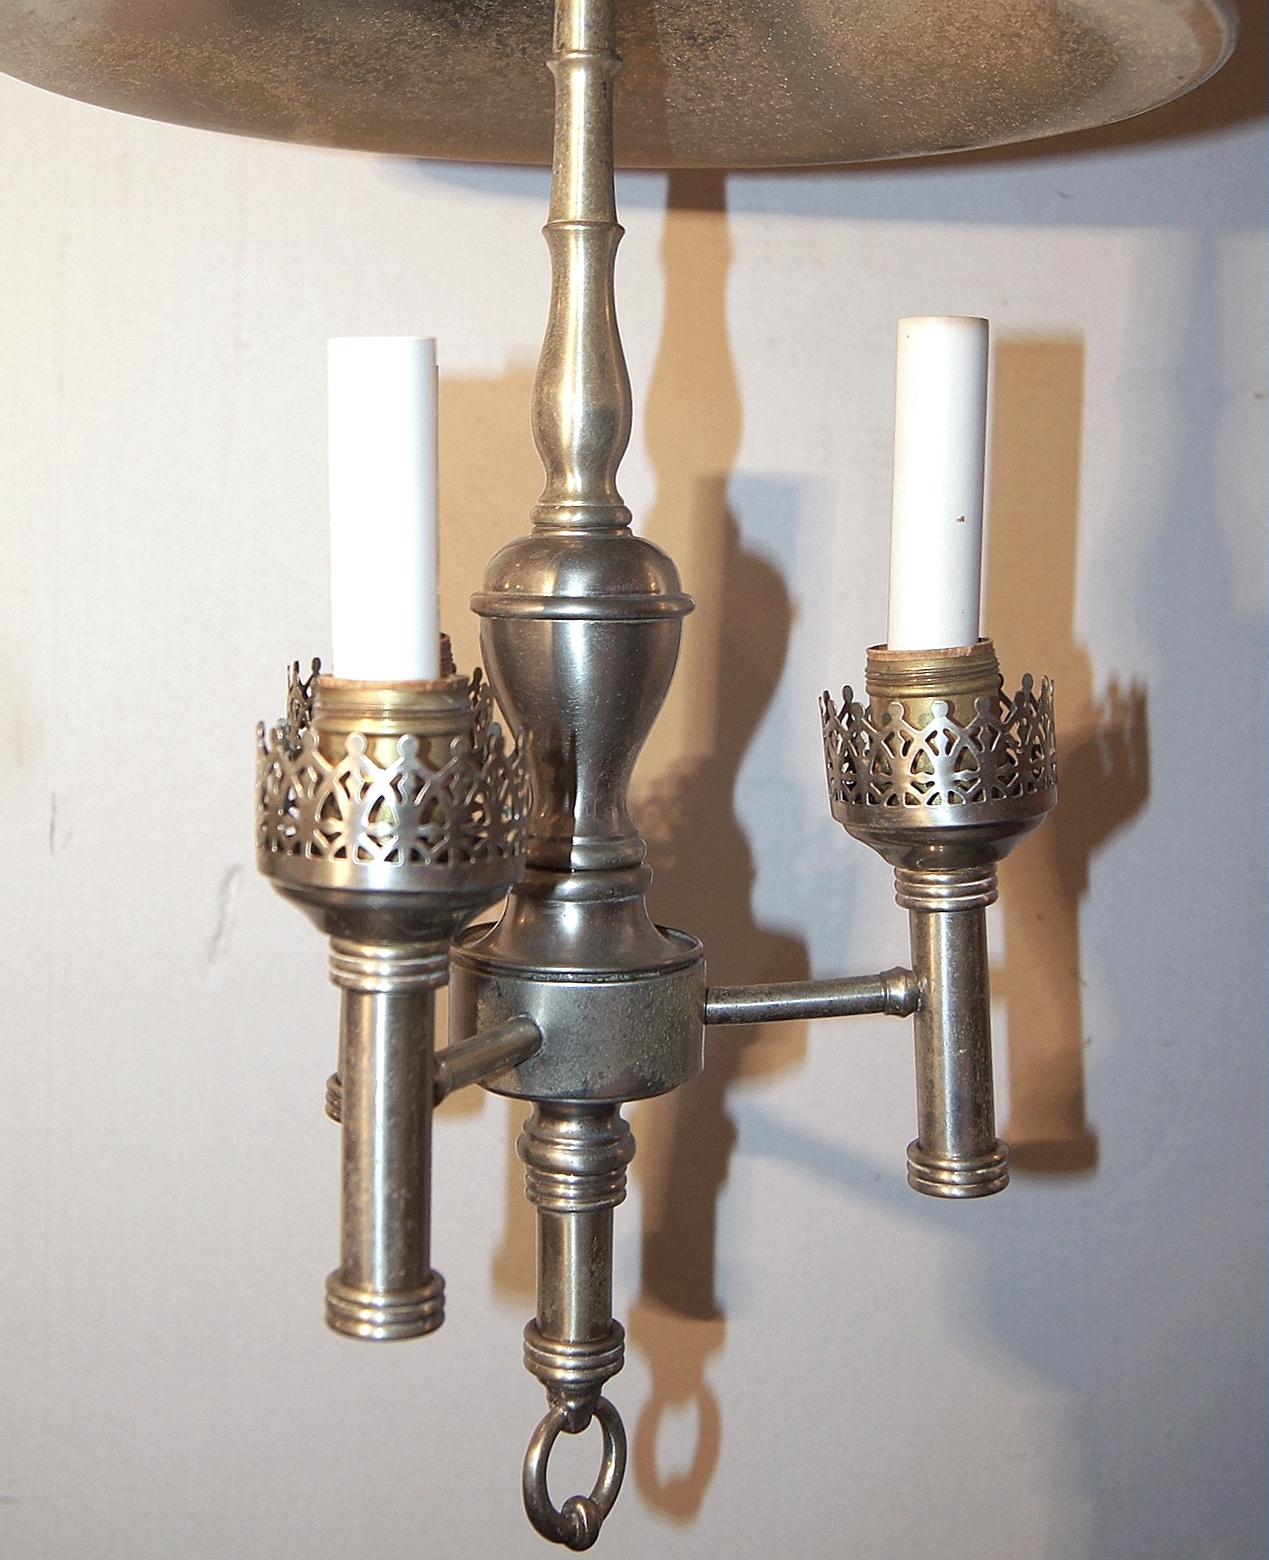 A circa 1940's English three-light pewter chandelier with original patina and with shade.

Measurements:
Height: 21.5